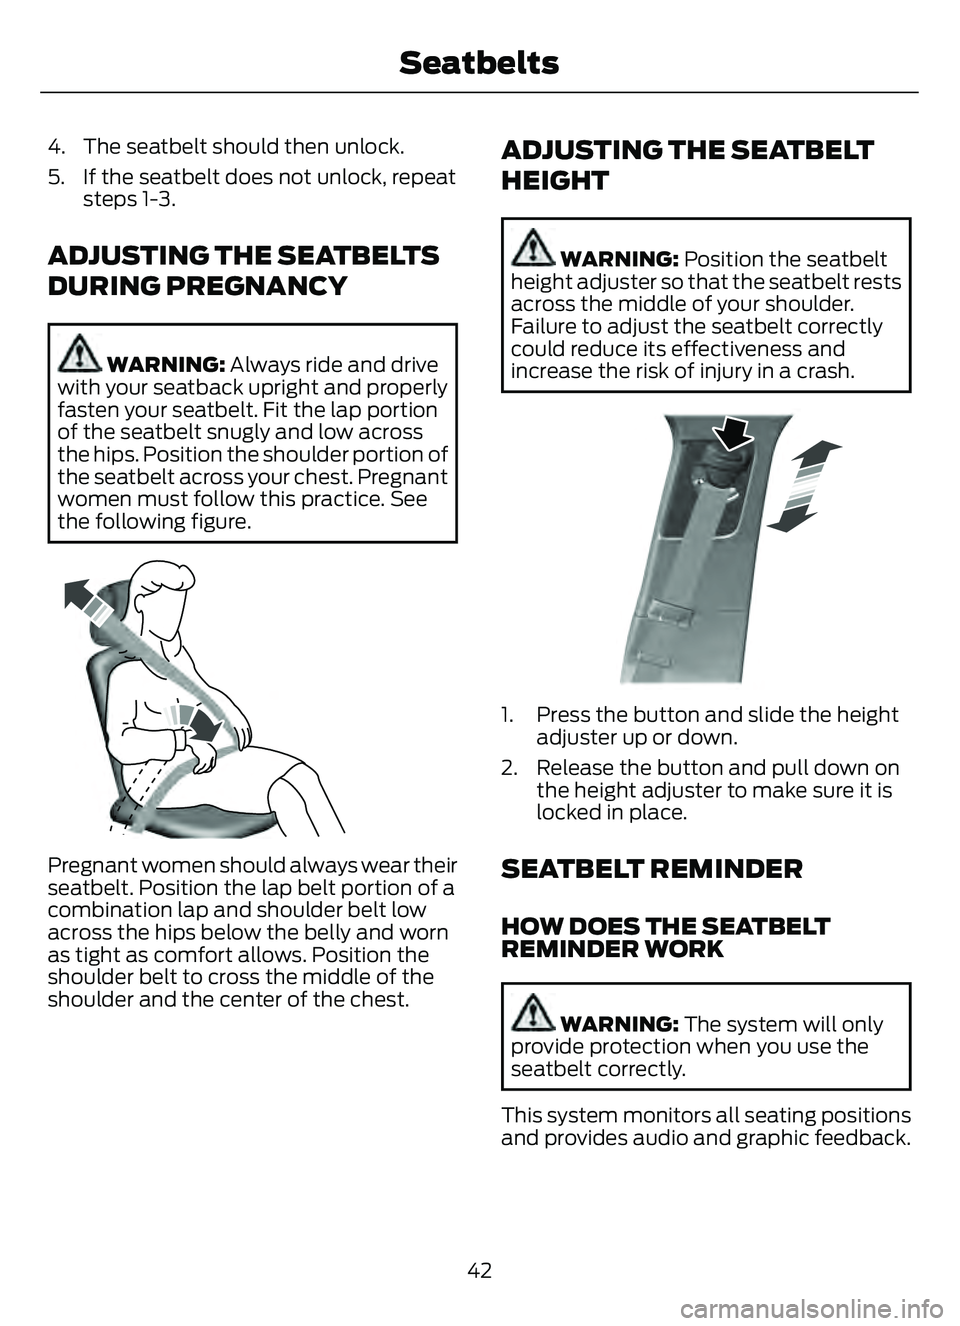 FORD ESCAPE 2022  Owners Manual 4. The seatbelt should then unlock.
5. If the seatbelt does not unlock, repeatsteps 1-3.
ADJUSTING THE SEATBELTS
DURING PREGNANCY
WARNING: Always ride and drive
with your seatback upright and properly